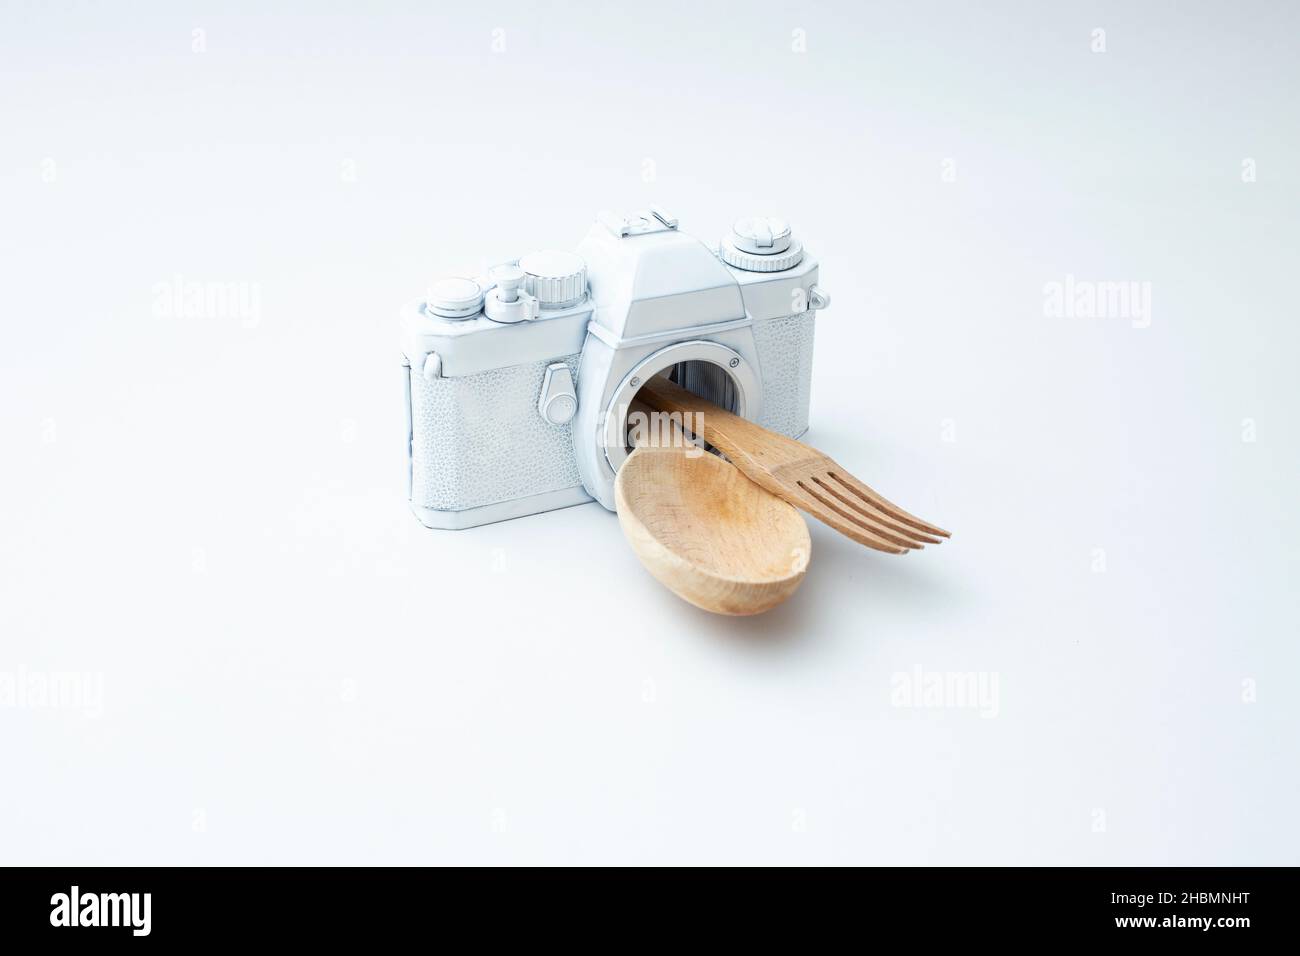 wooden spoon and fork coming out from a white vintage camera. Food photography concept. Stock Photo